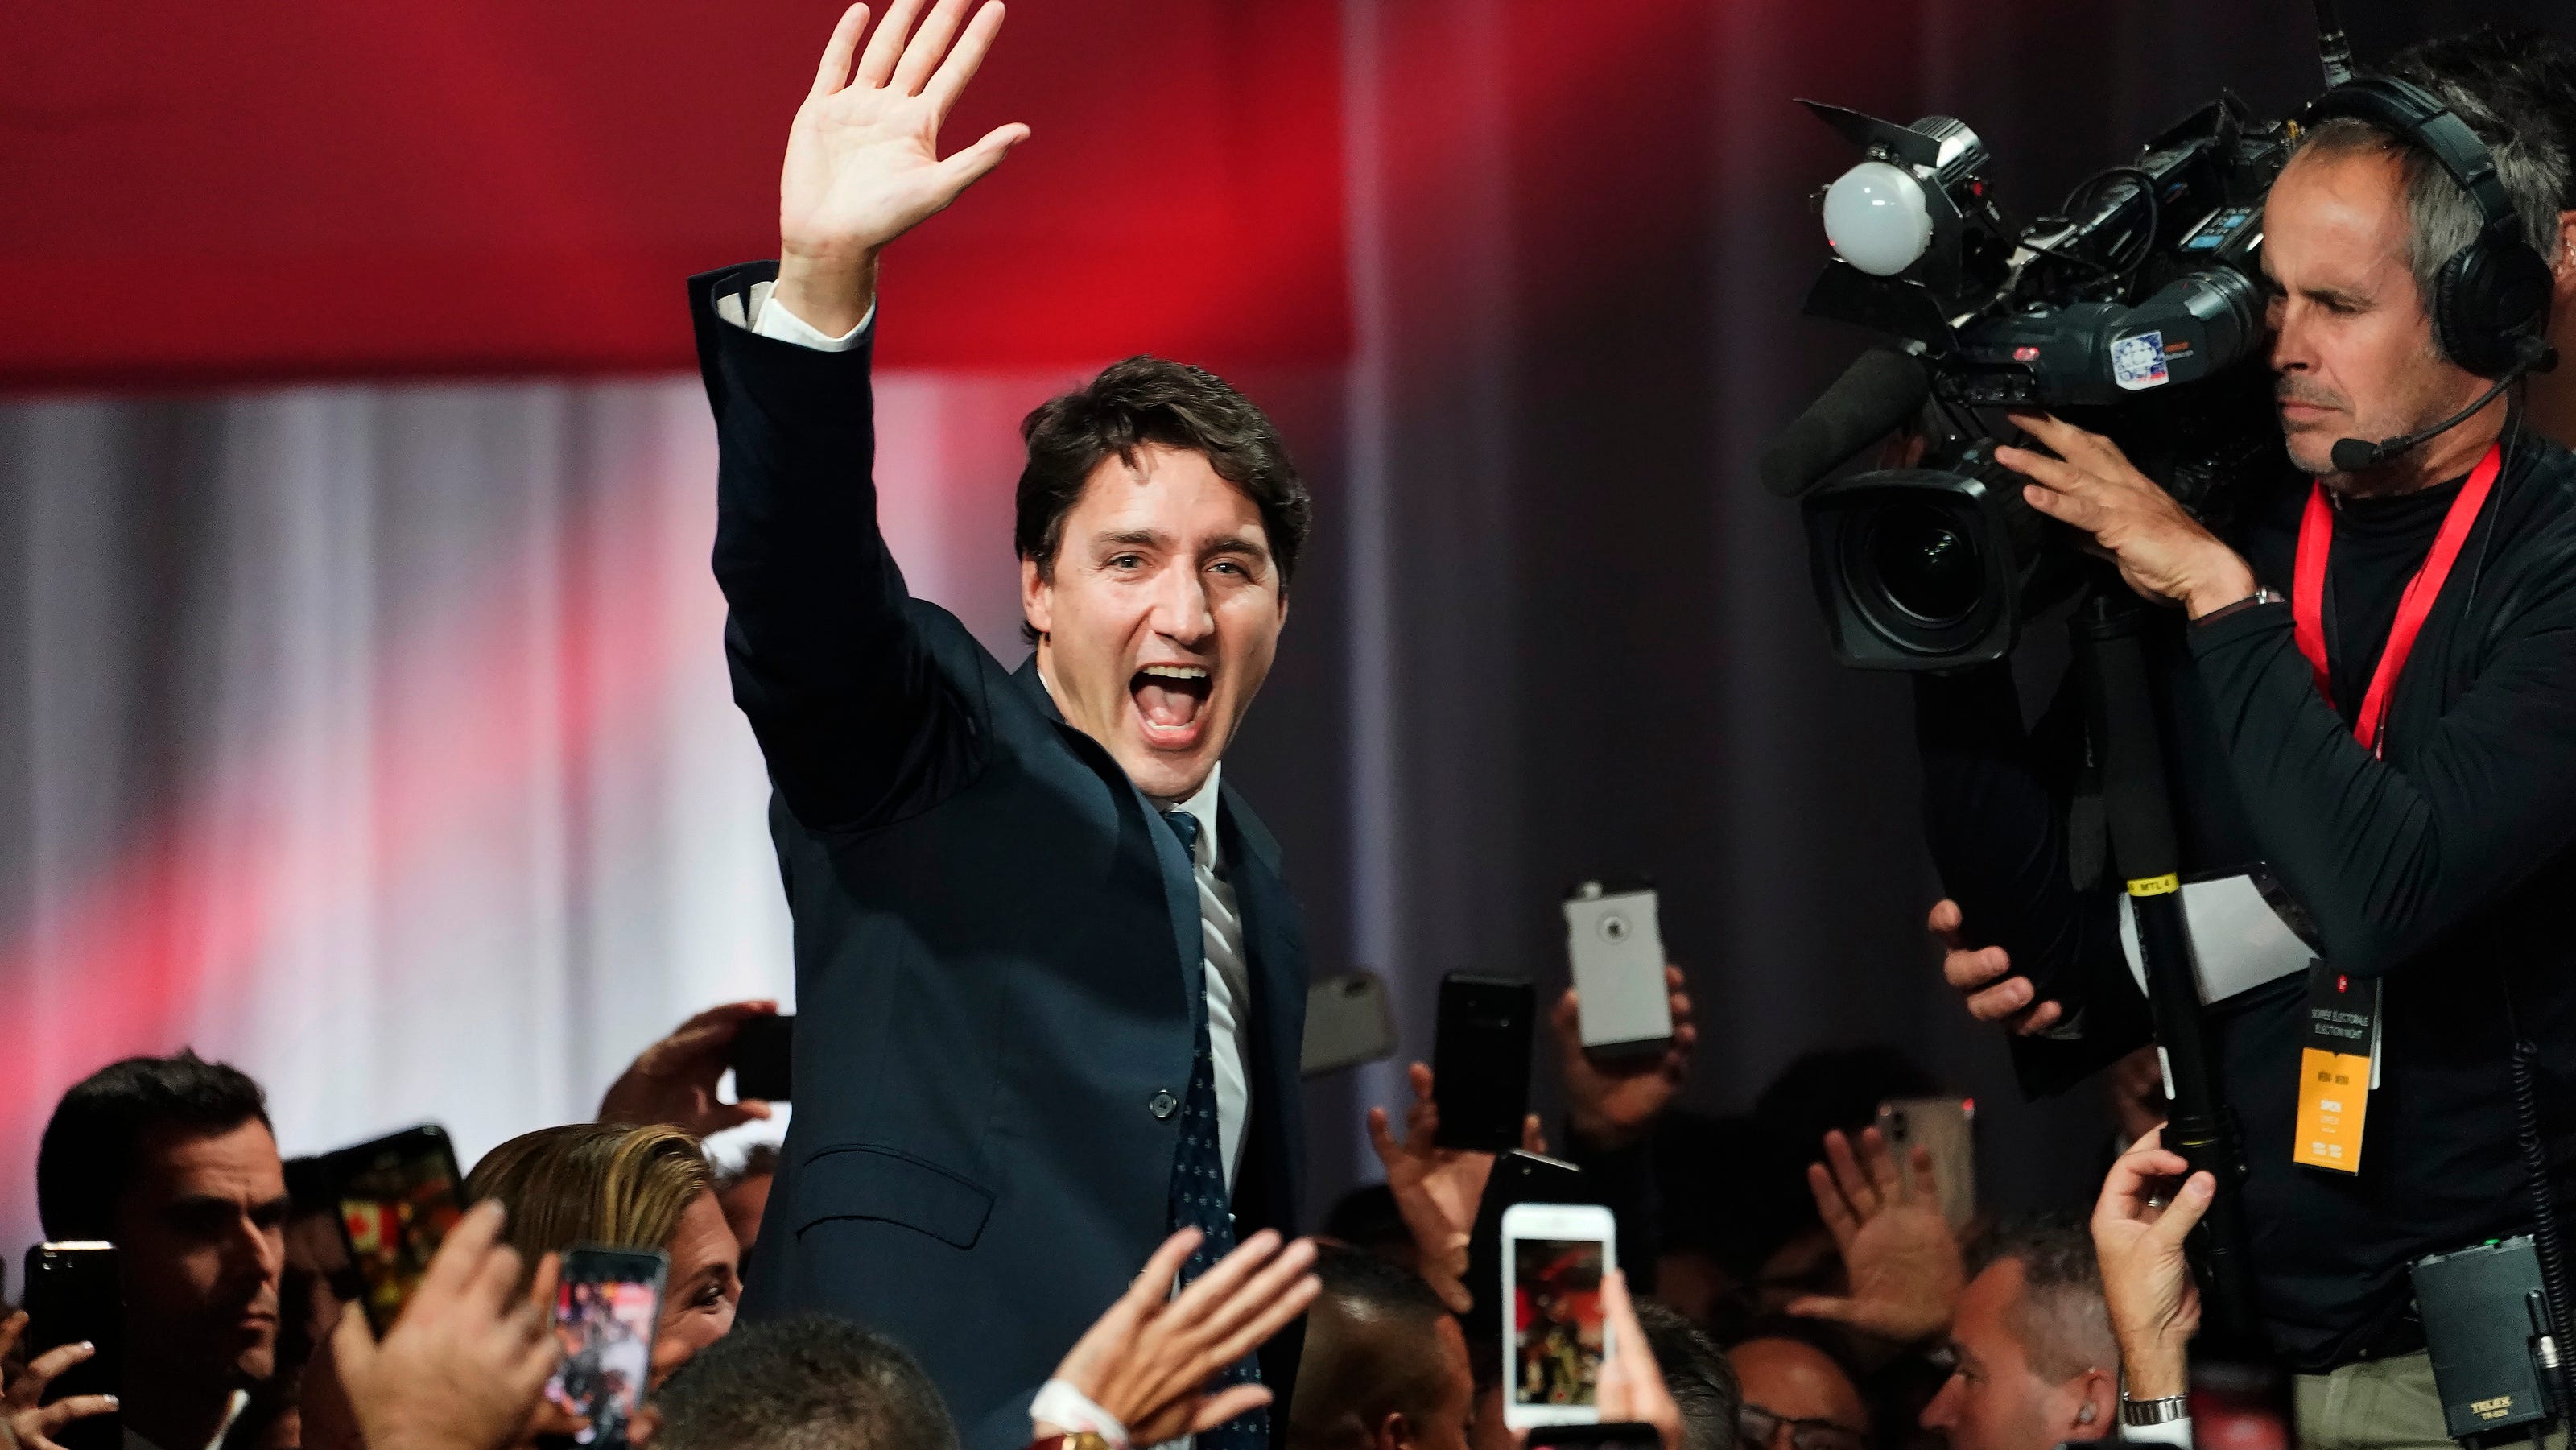 Justin Trudeau Wins Second Term But Loses Majority In Canada Election